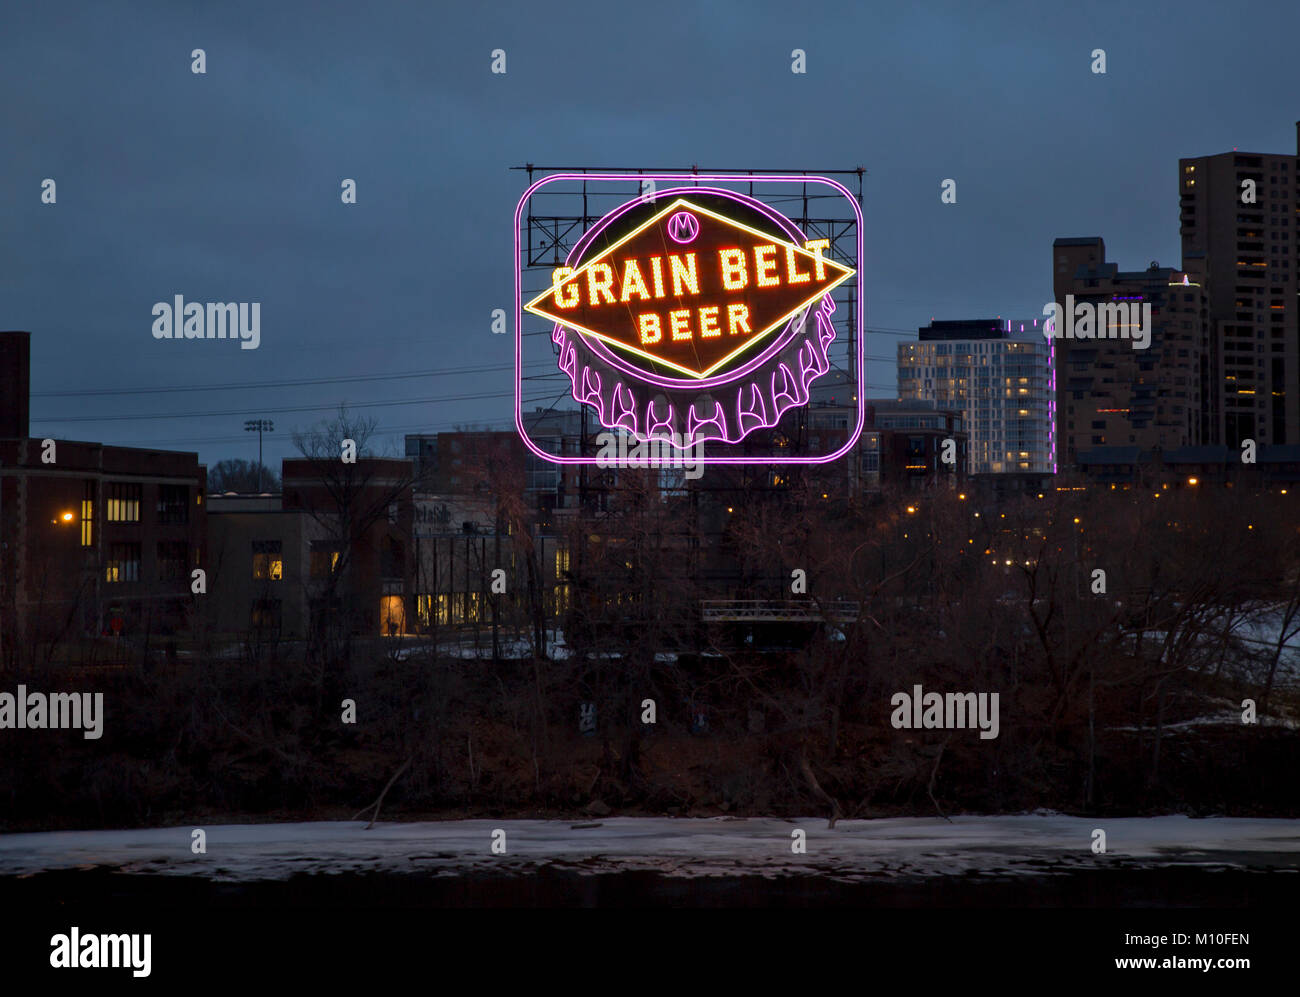 The iconic 1941 Grain Belt Beer sign in shades of neon purple in Minneapolis, Minnesota - The color purple is to recognize the NFL Minnesota Vikings f Stock Photo